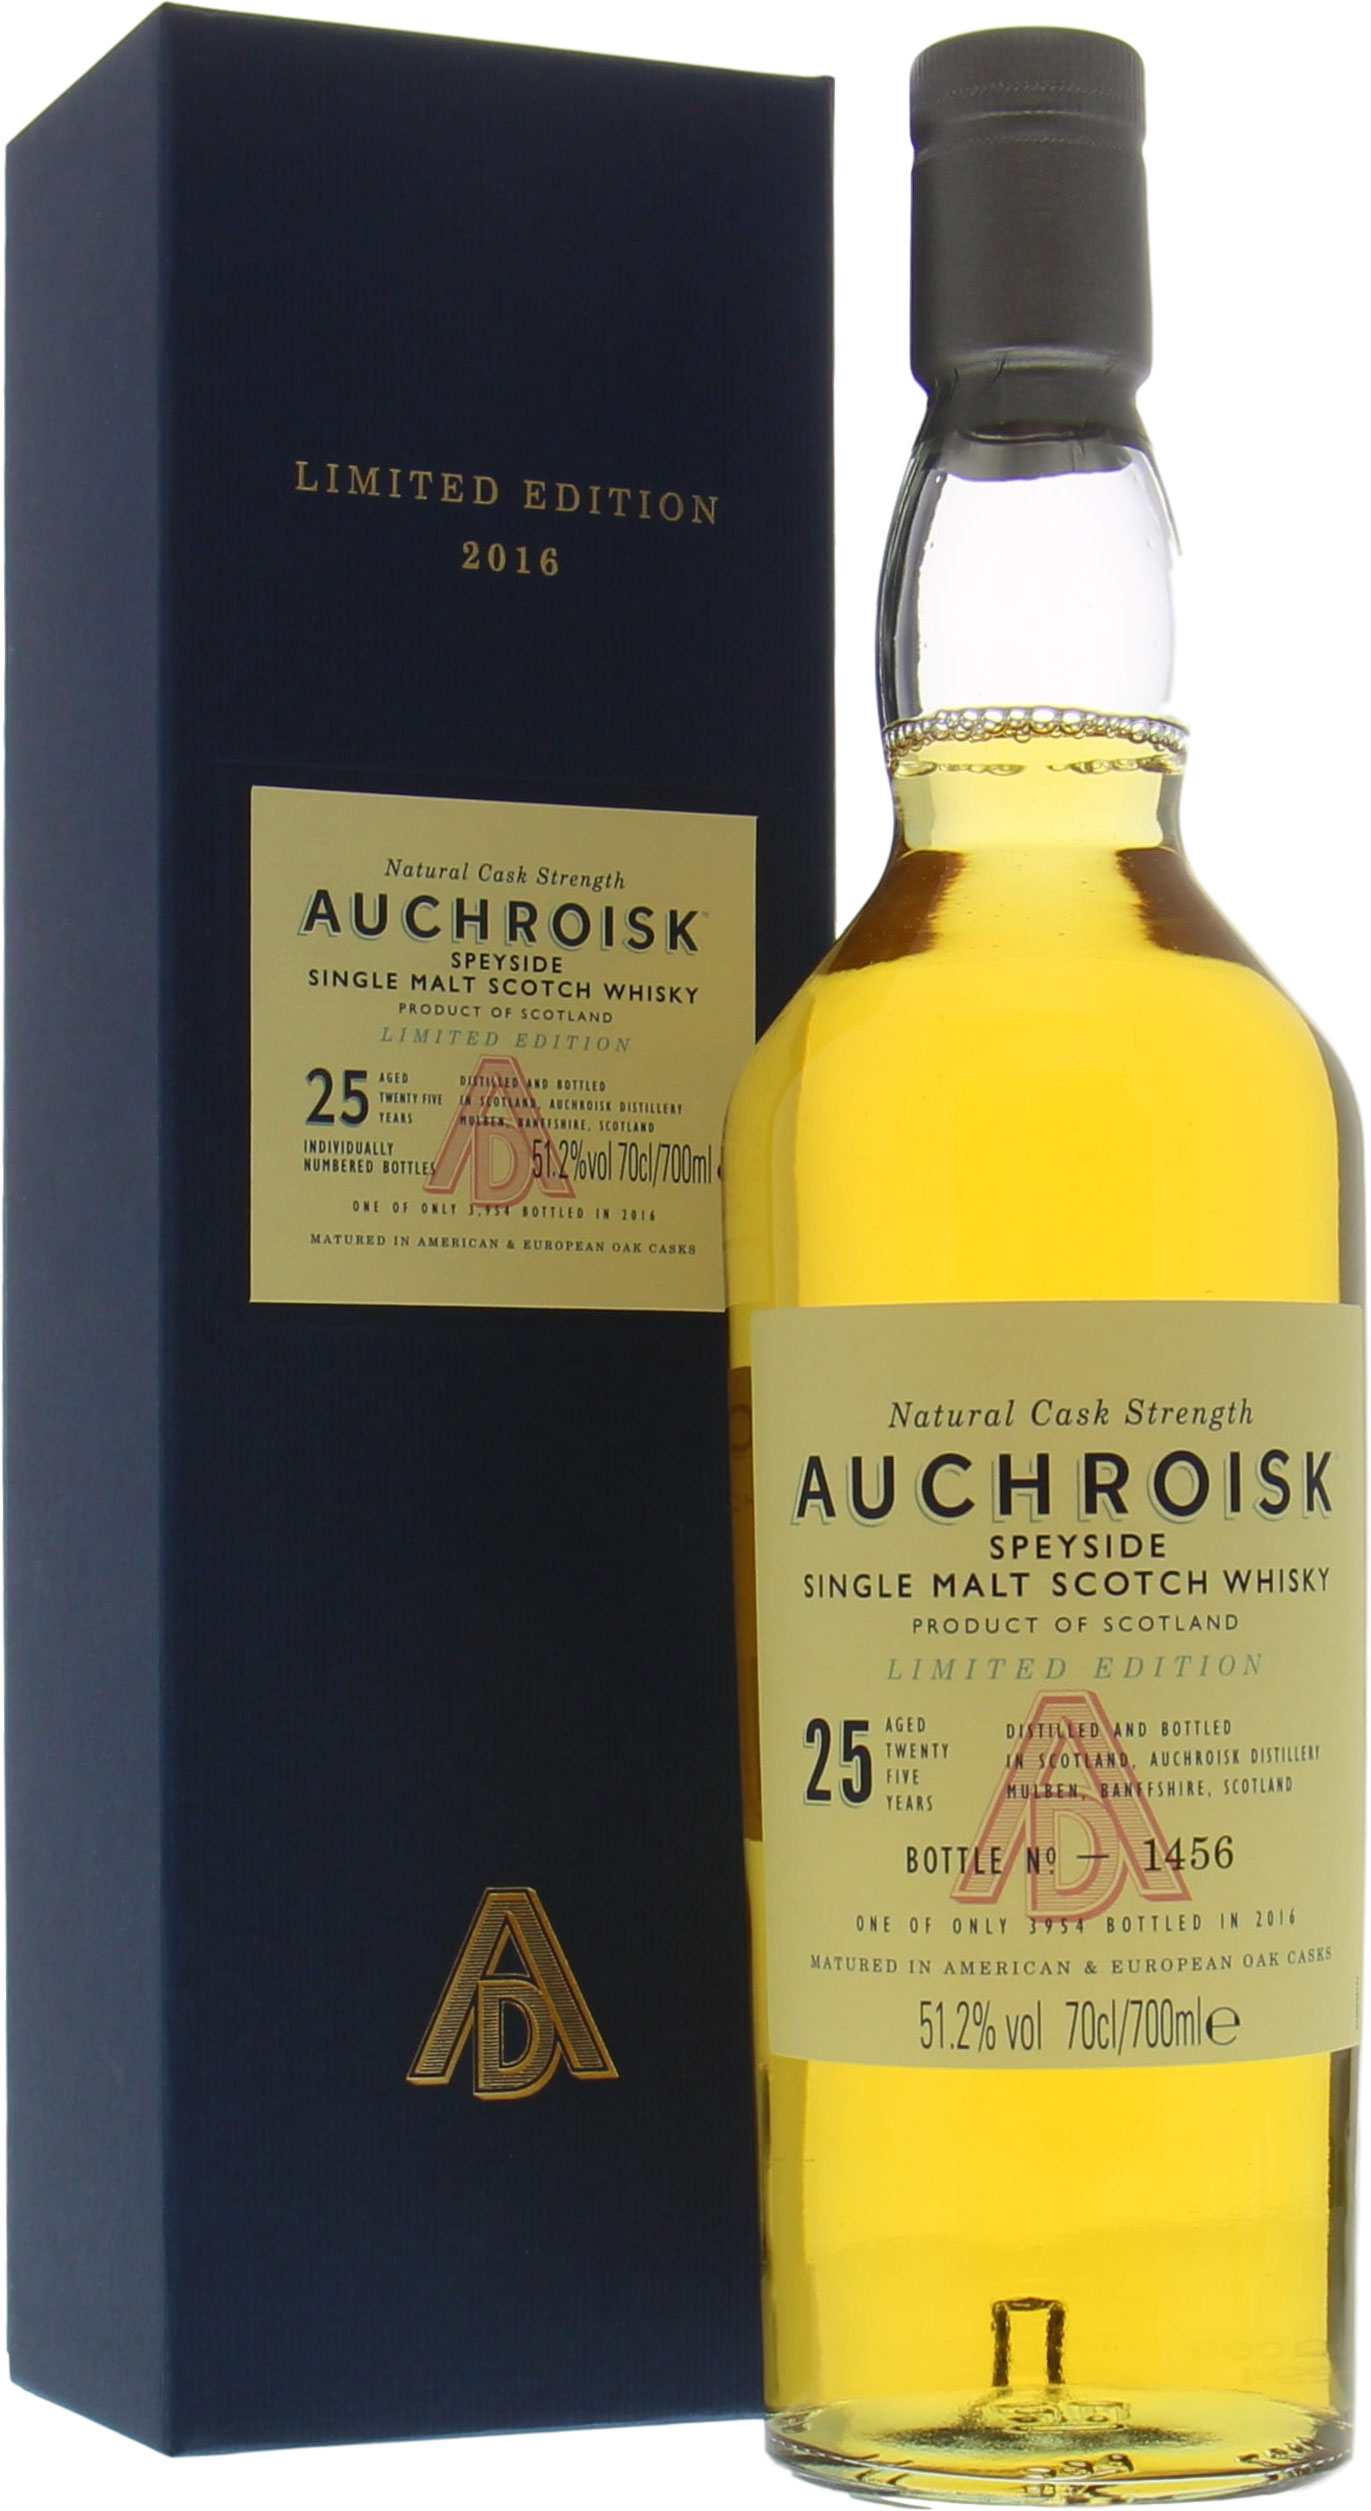 Auchroisk - 25 Years Old Diageo Special Release 2016 51.2% NV Perfect